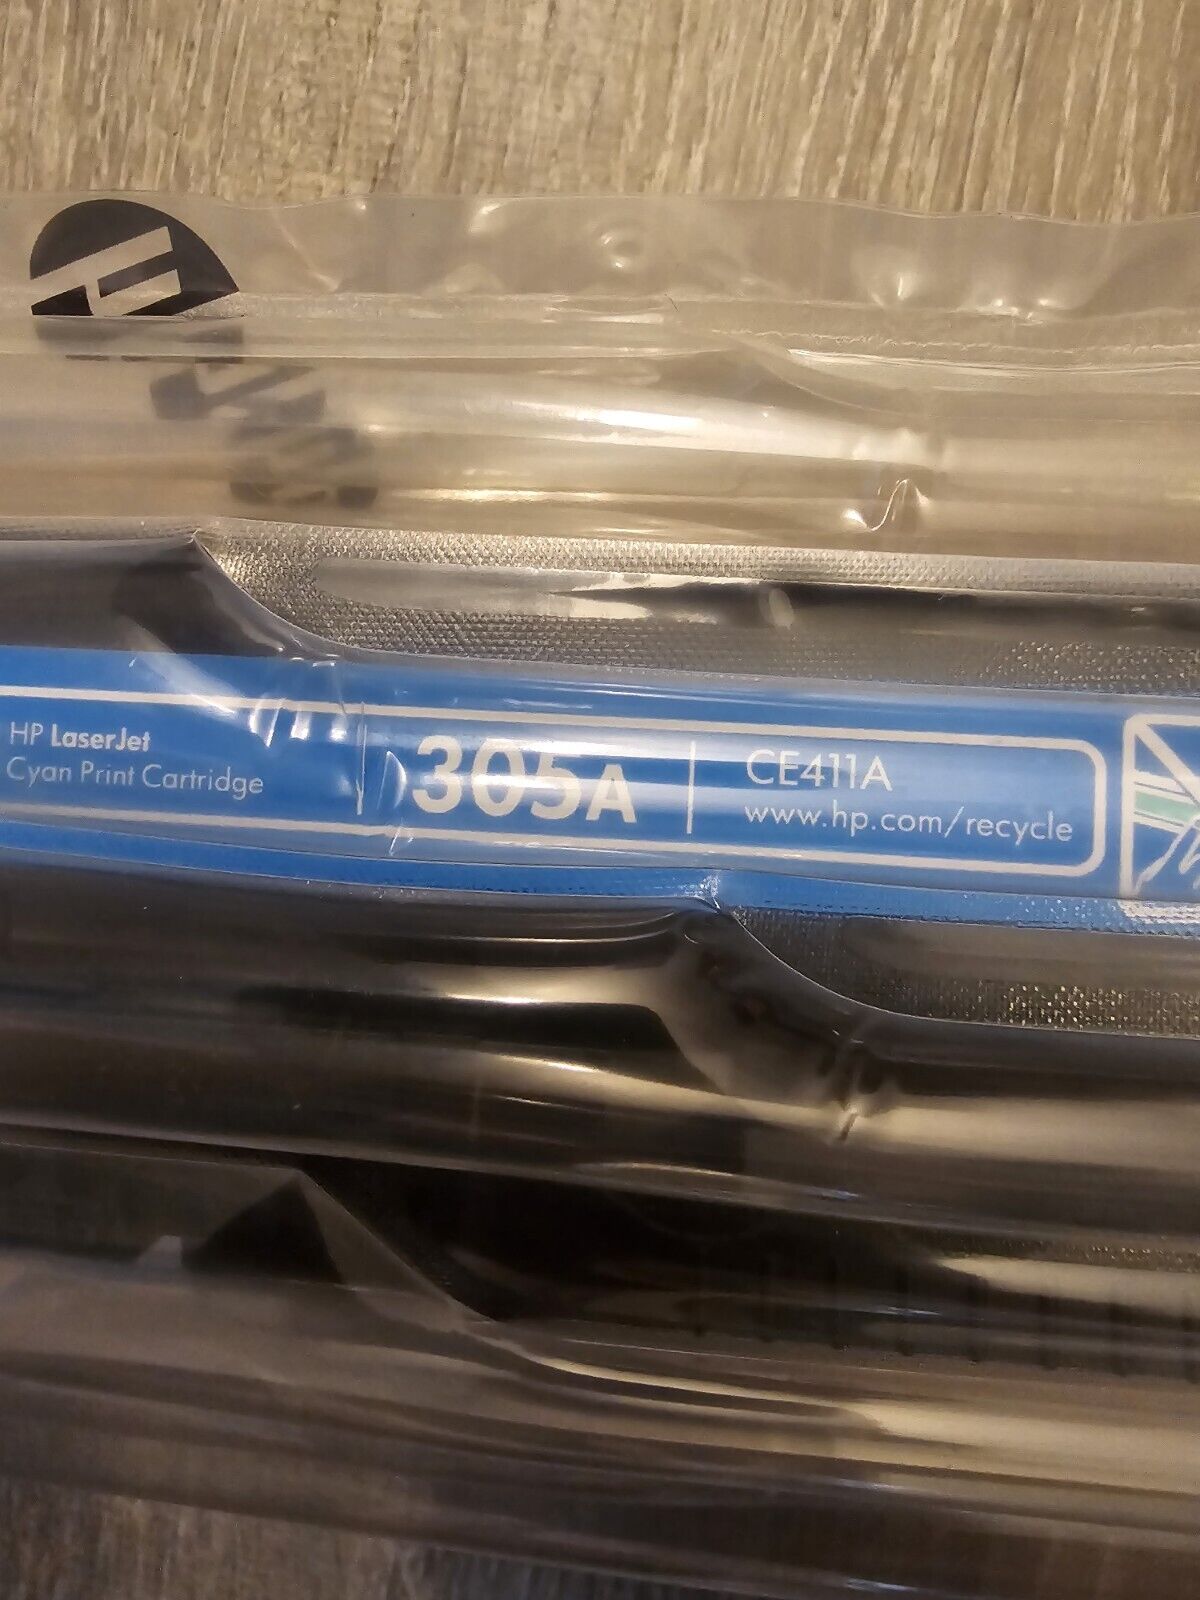 HP CE411A 305A Cyan OEM Brand New, Open Box, Sealed Plastic